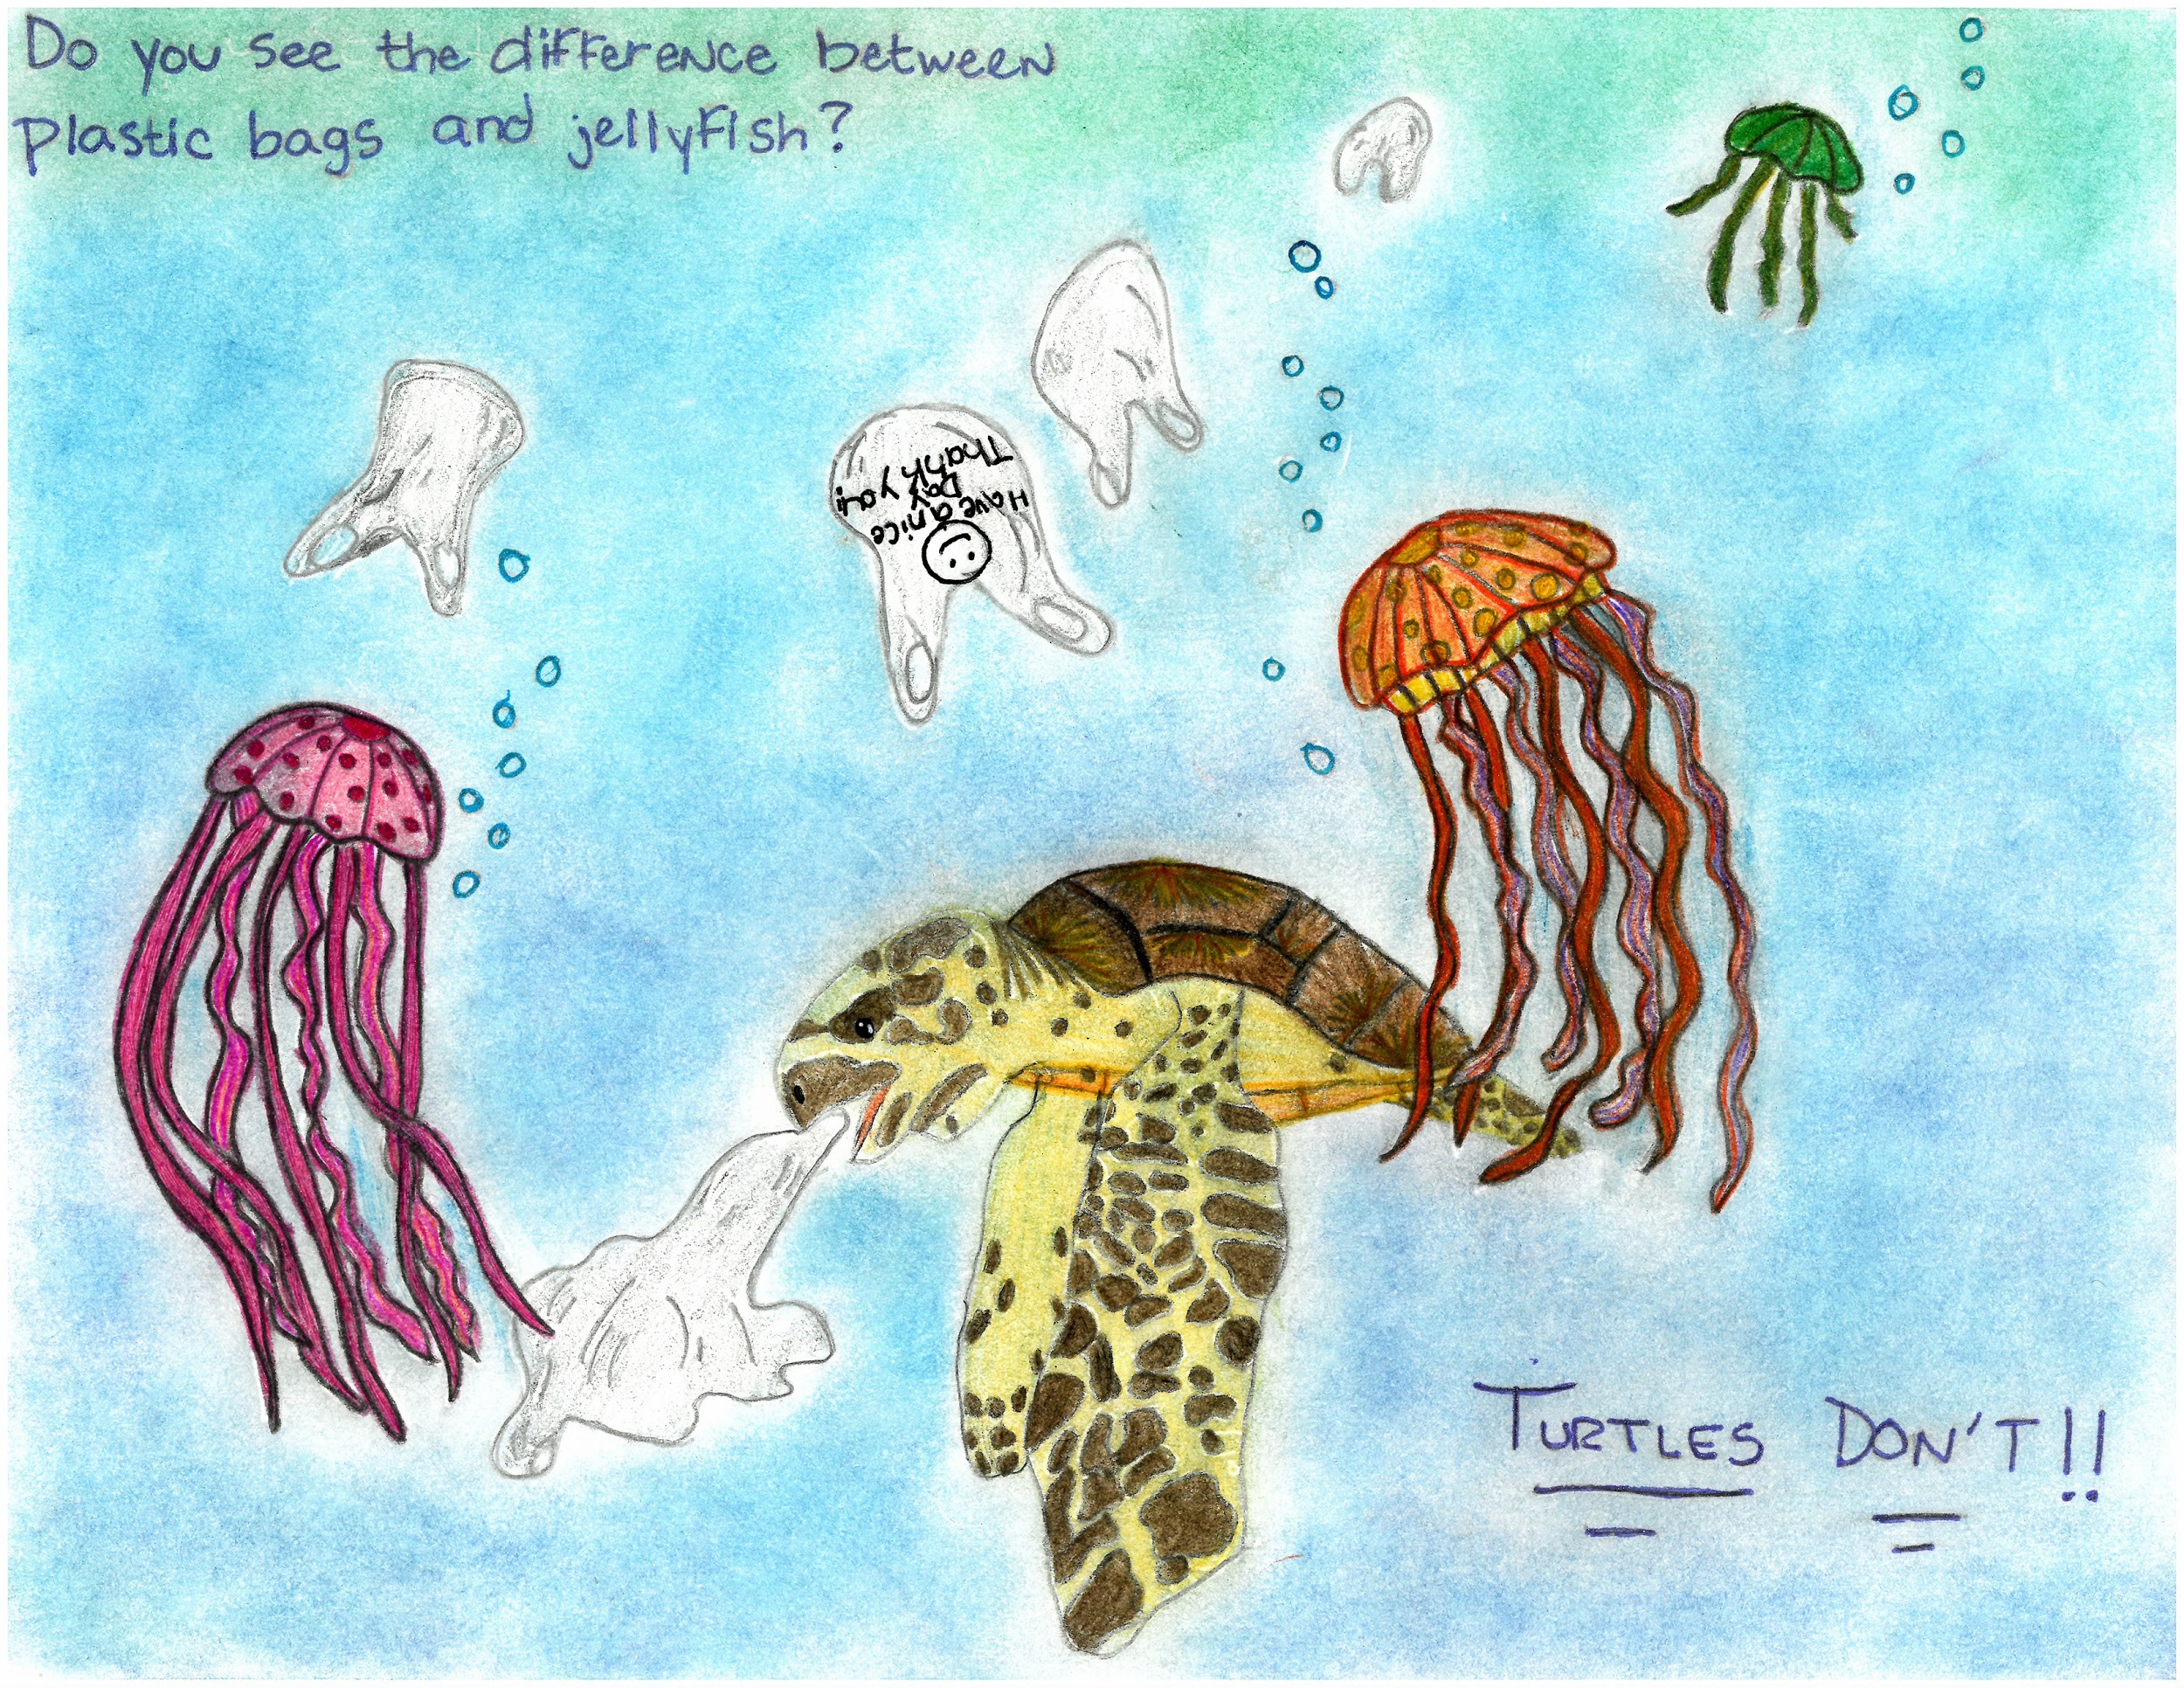 Text: Do you see the difference between plastic bags and jellyfish? Turtles don't! Image: Child’s artwork depicting a sea turtle in the ocean that is surrounded by jellyfish and plastic bags. The turtle is coughing up a plastic bag because it mistook the marine debris as a jellyfish.